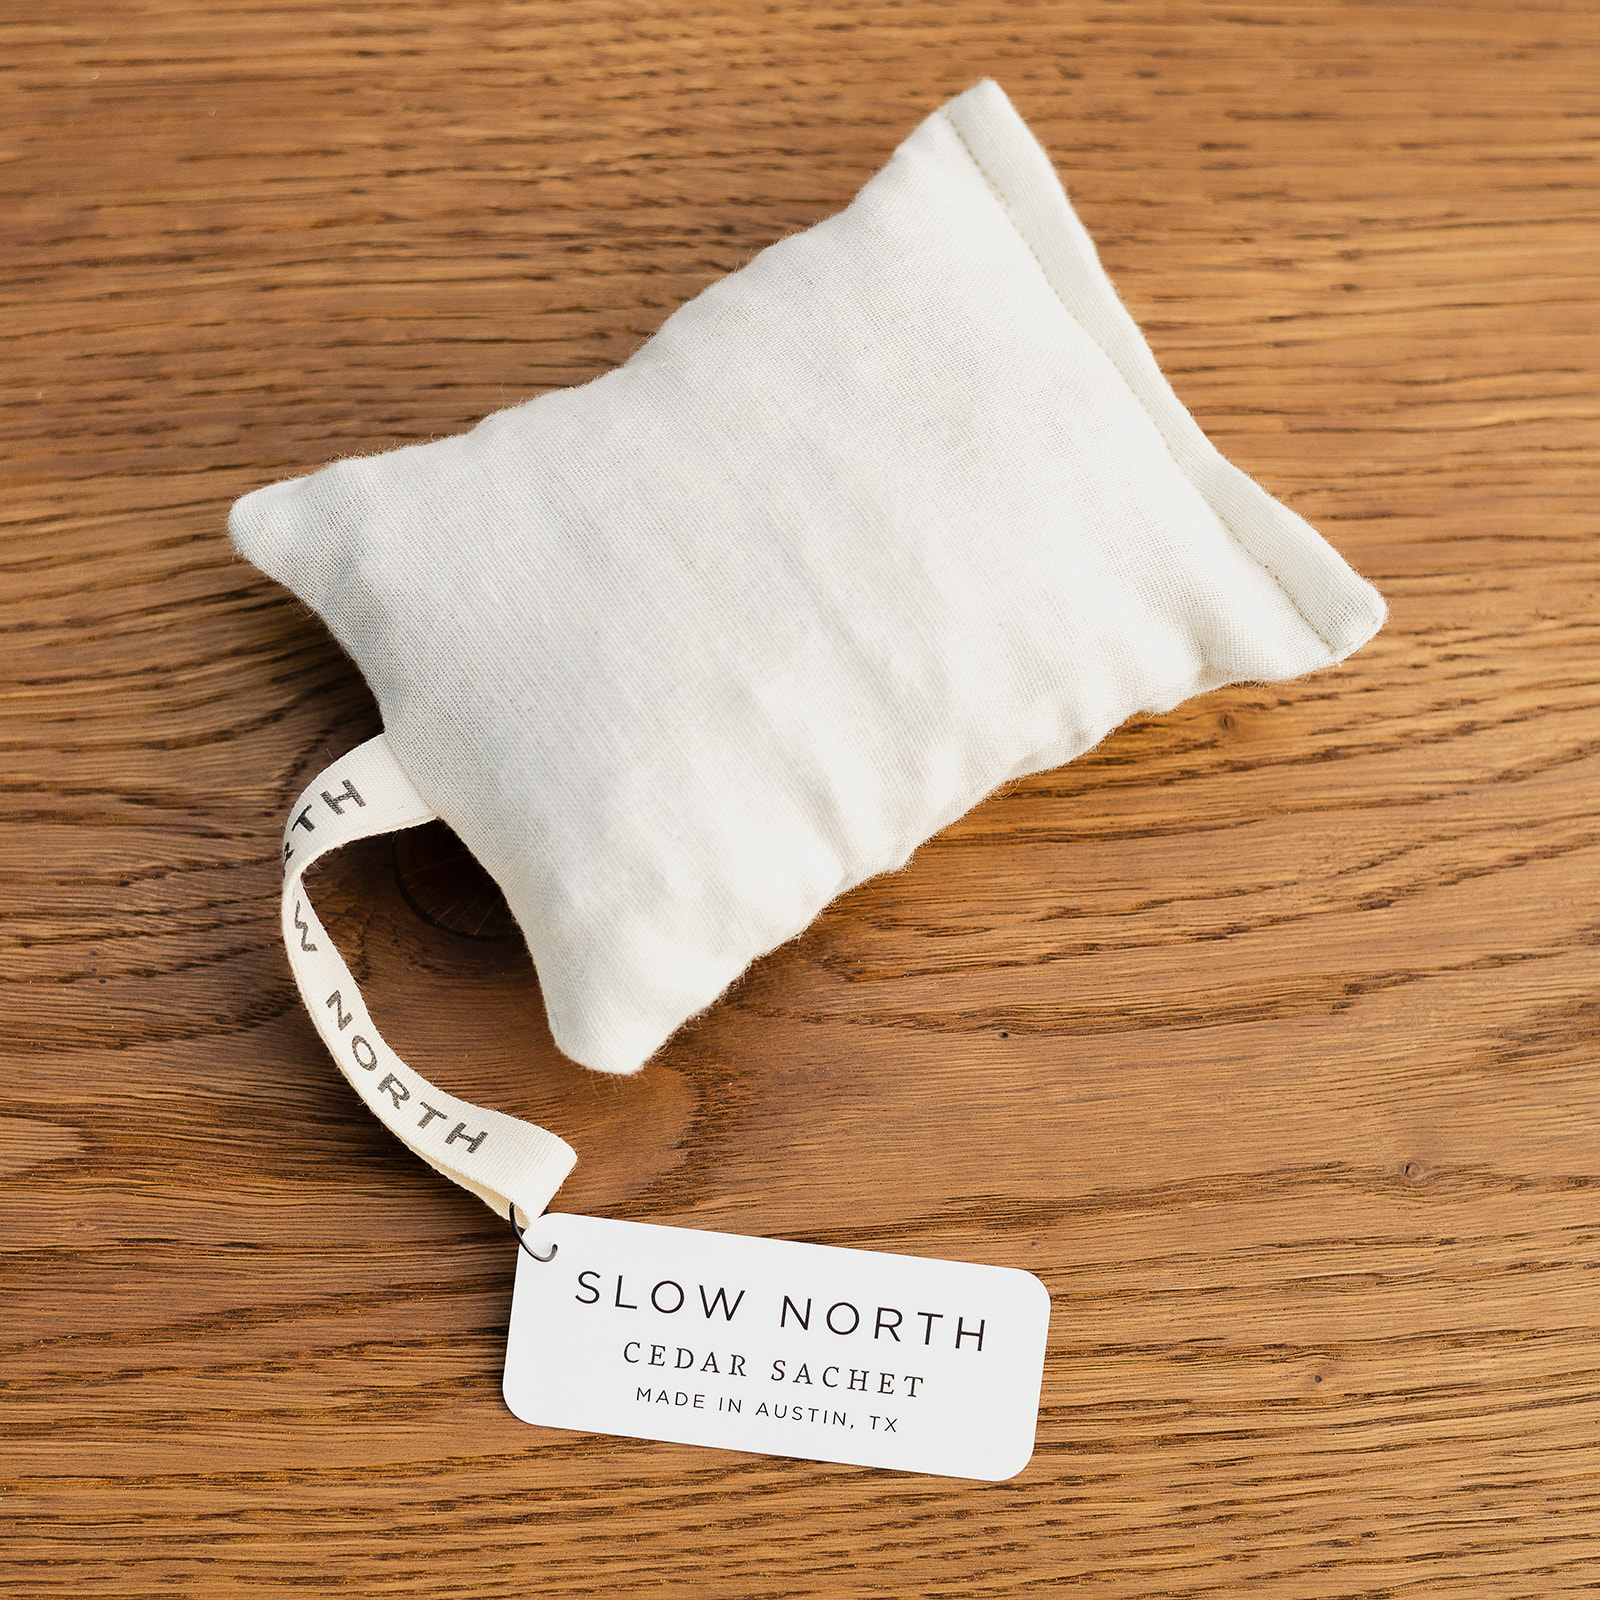 A close-up of a rectangle natural cotton herbal sachet that is an off-white cloth and filled with cedar chips.